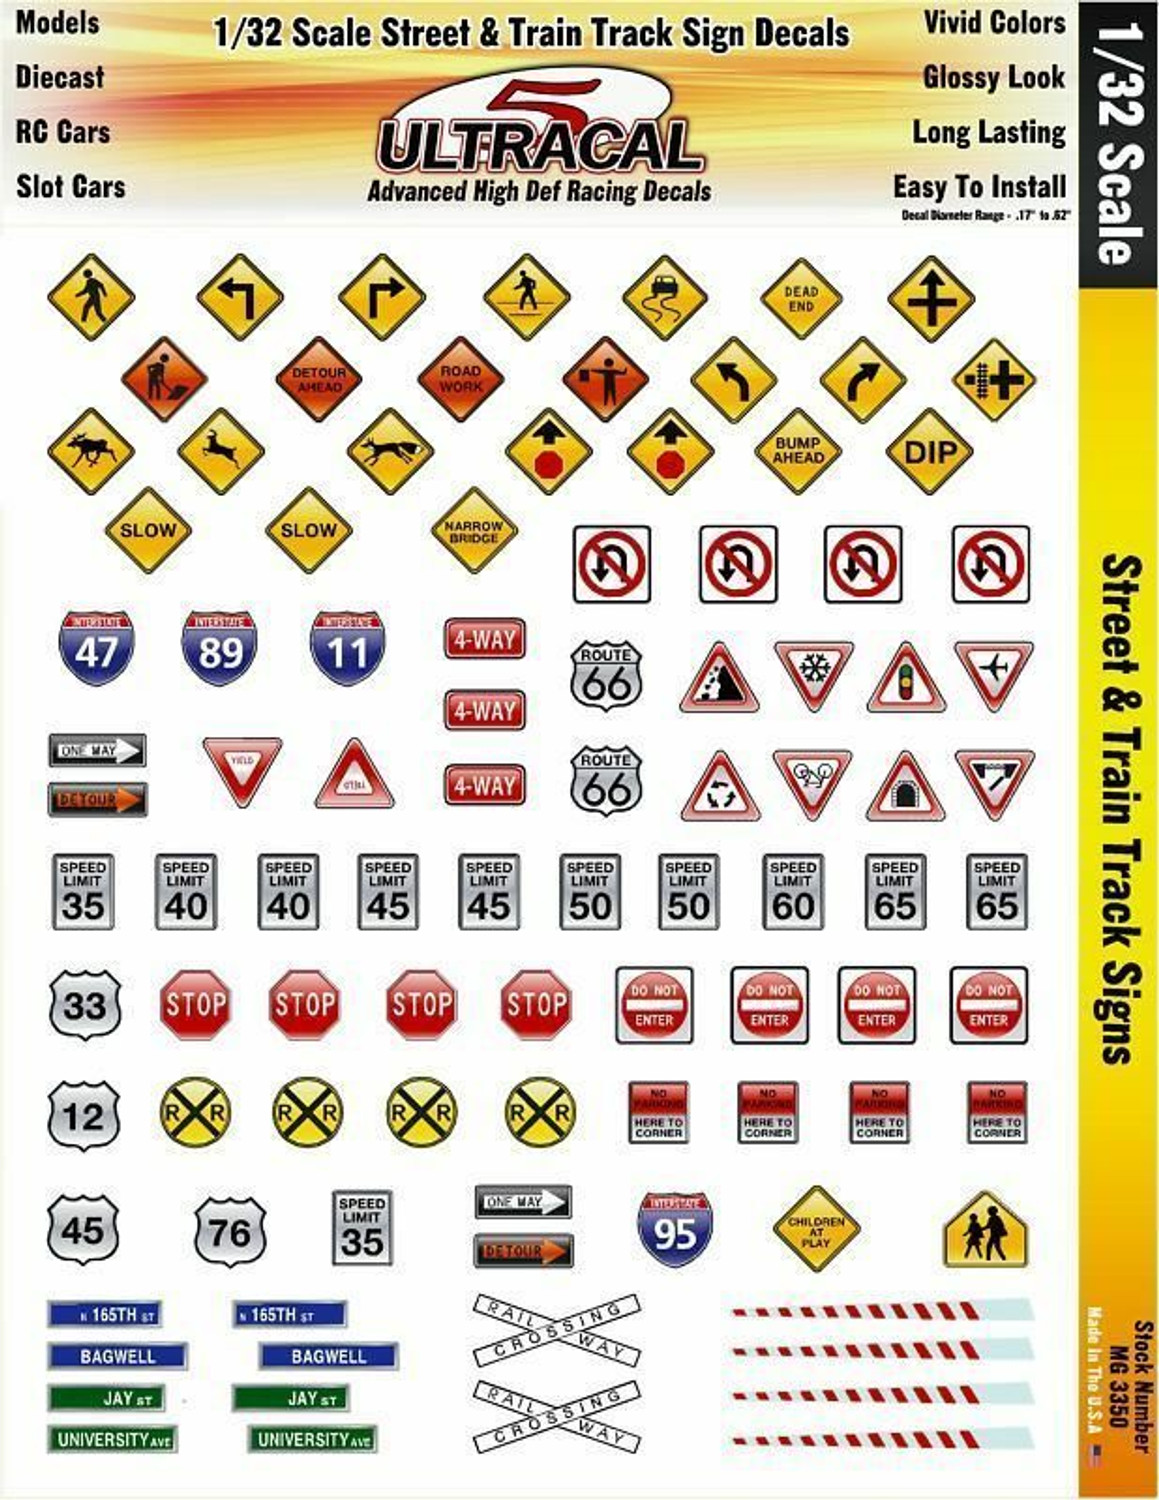 MG 3350 Ultracal Street and Train Track Sign Decals for 1:32 Scale Applications